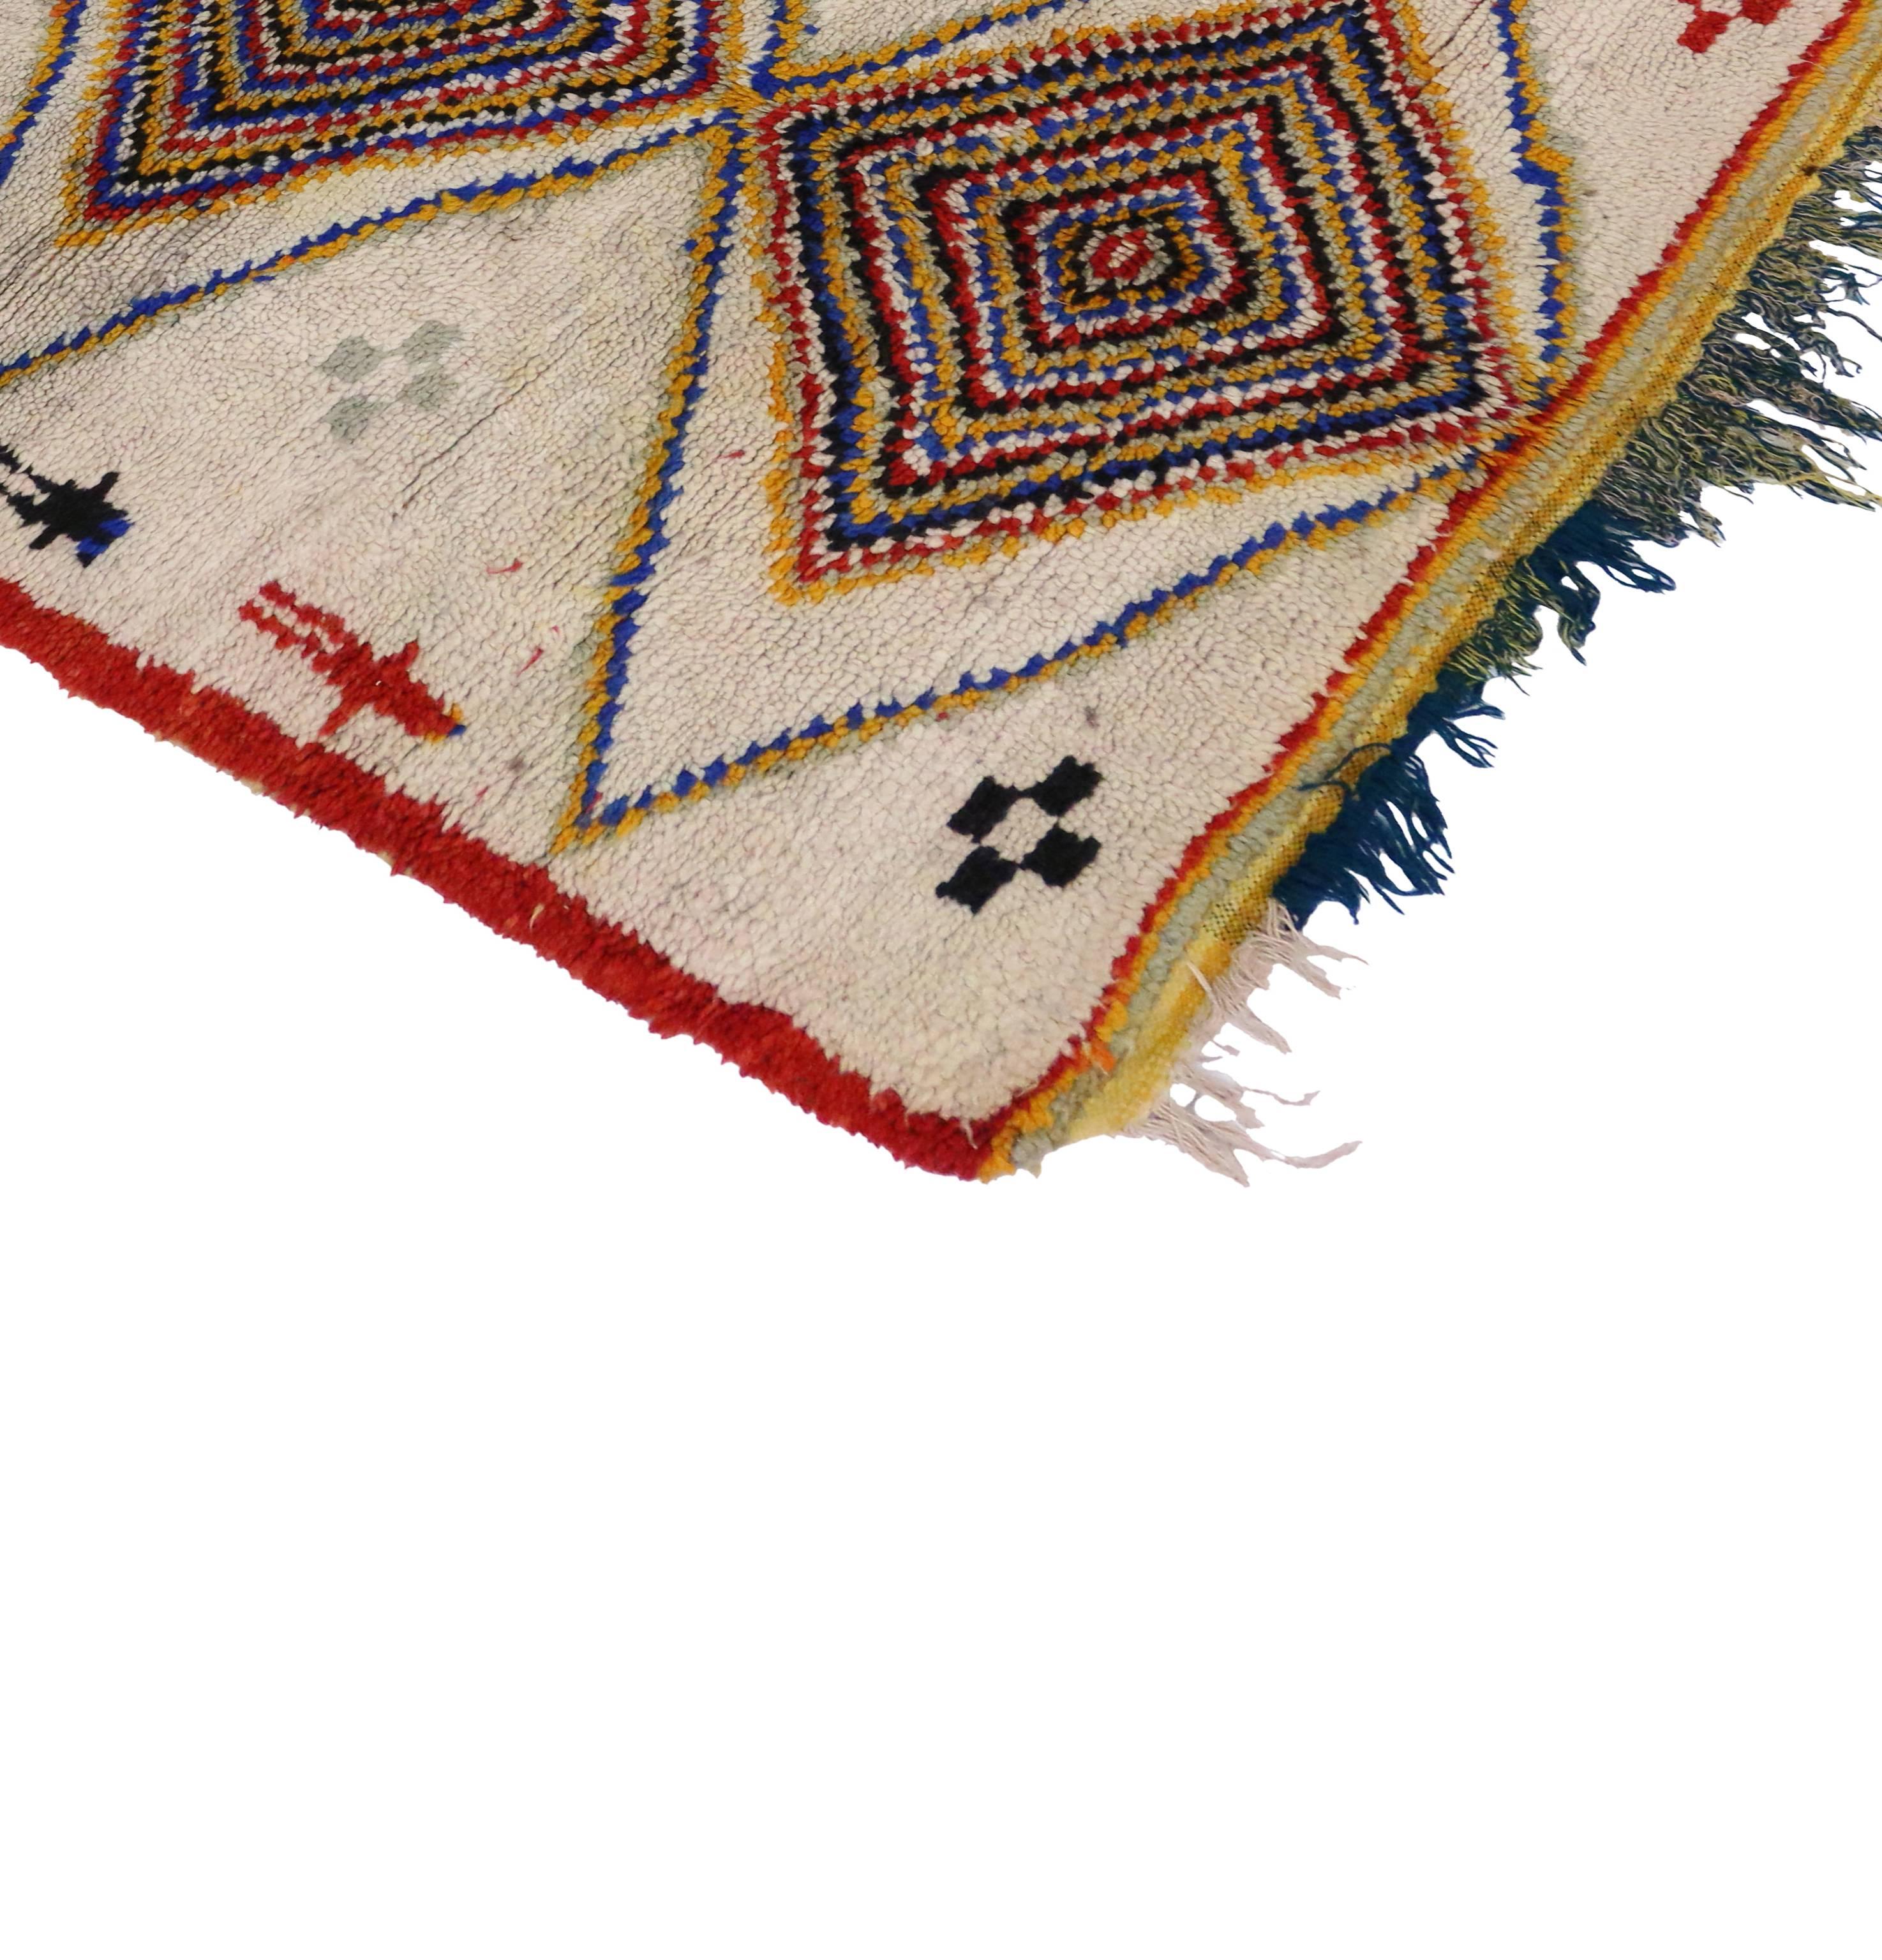 Joining the graphic appeal and folk-art warmth of Moroccan tribal motifs with energetic colors, this vintage Moroccan rug blends well with modernist decor and will add much needed color to a monochromatic interior. Believed to protect the human